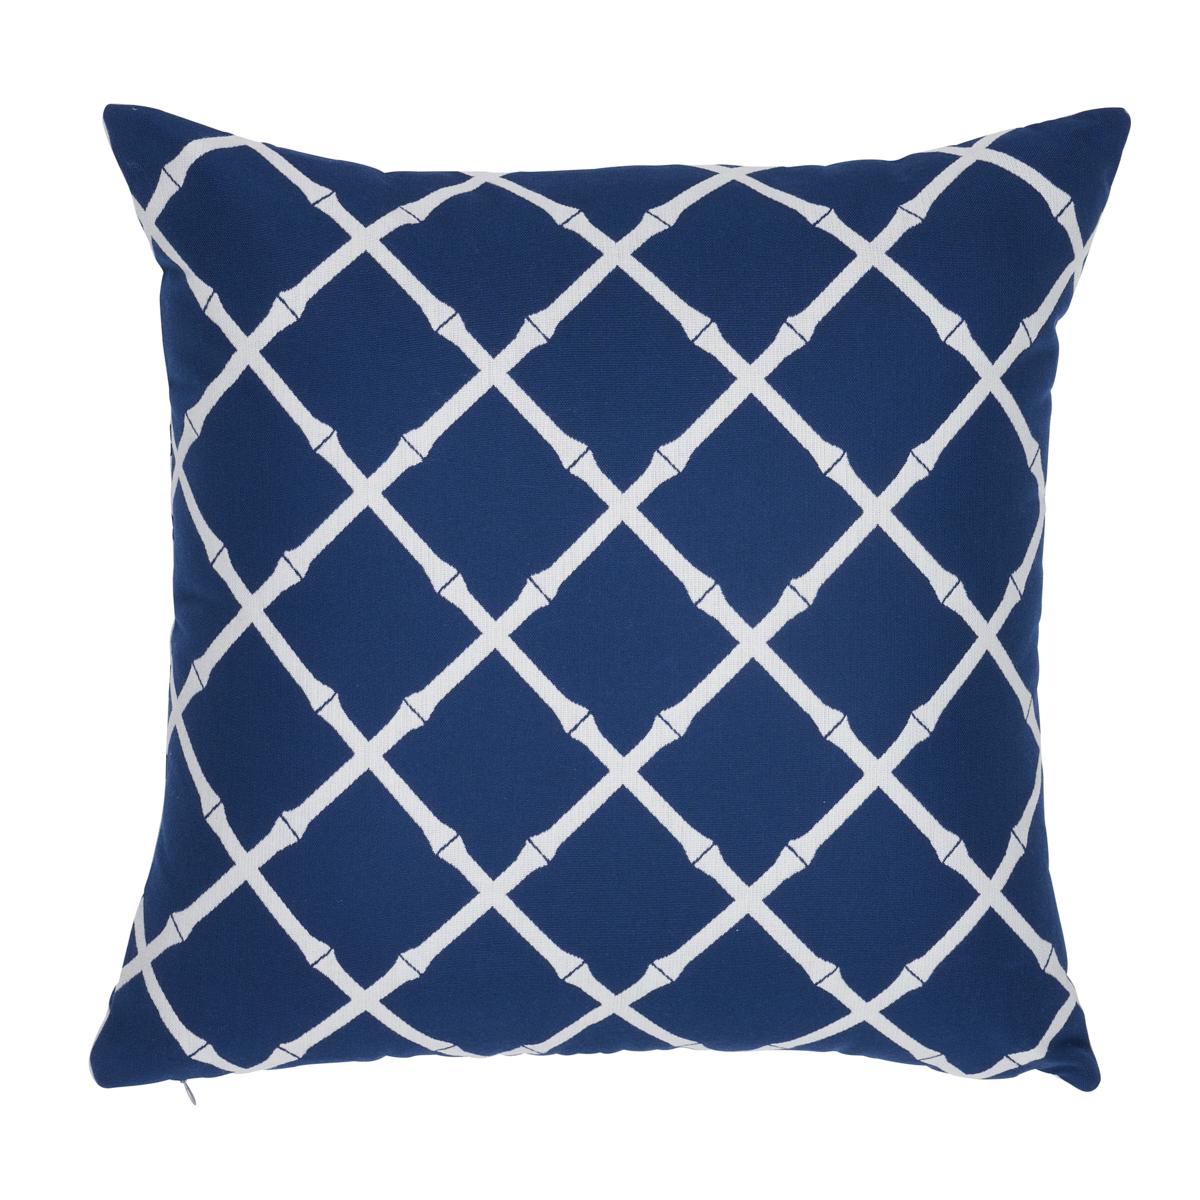 This pillow features Bamboo Trellis Indoor/Outdoor with a knife edge finish. Look no further than Bamboo Trellis Indoor/Outdoor fabric in navy for a classic mid-scale lattice with more than a hint of Hollywood glamour. Pillow includes a polyfill